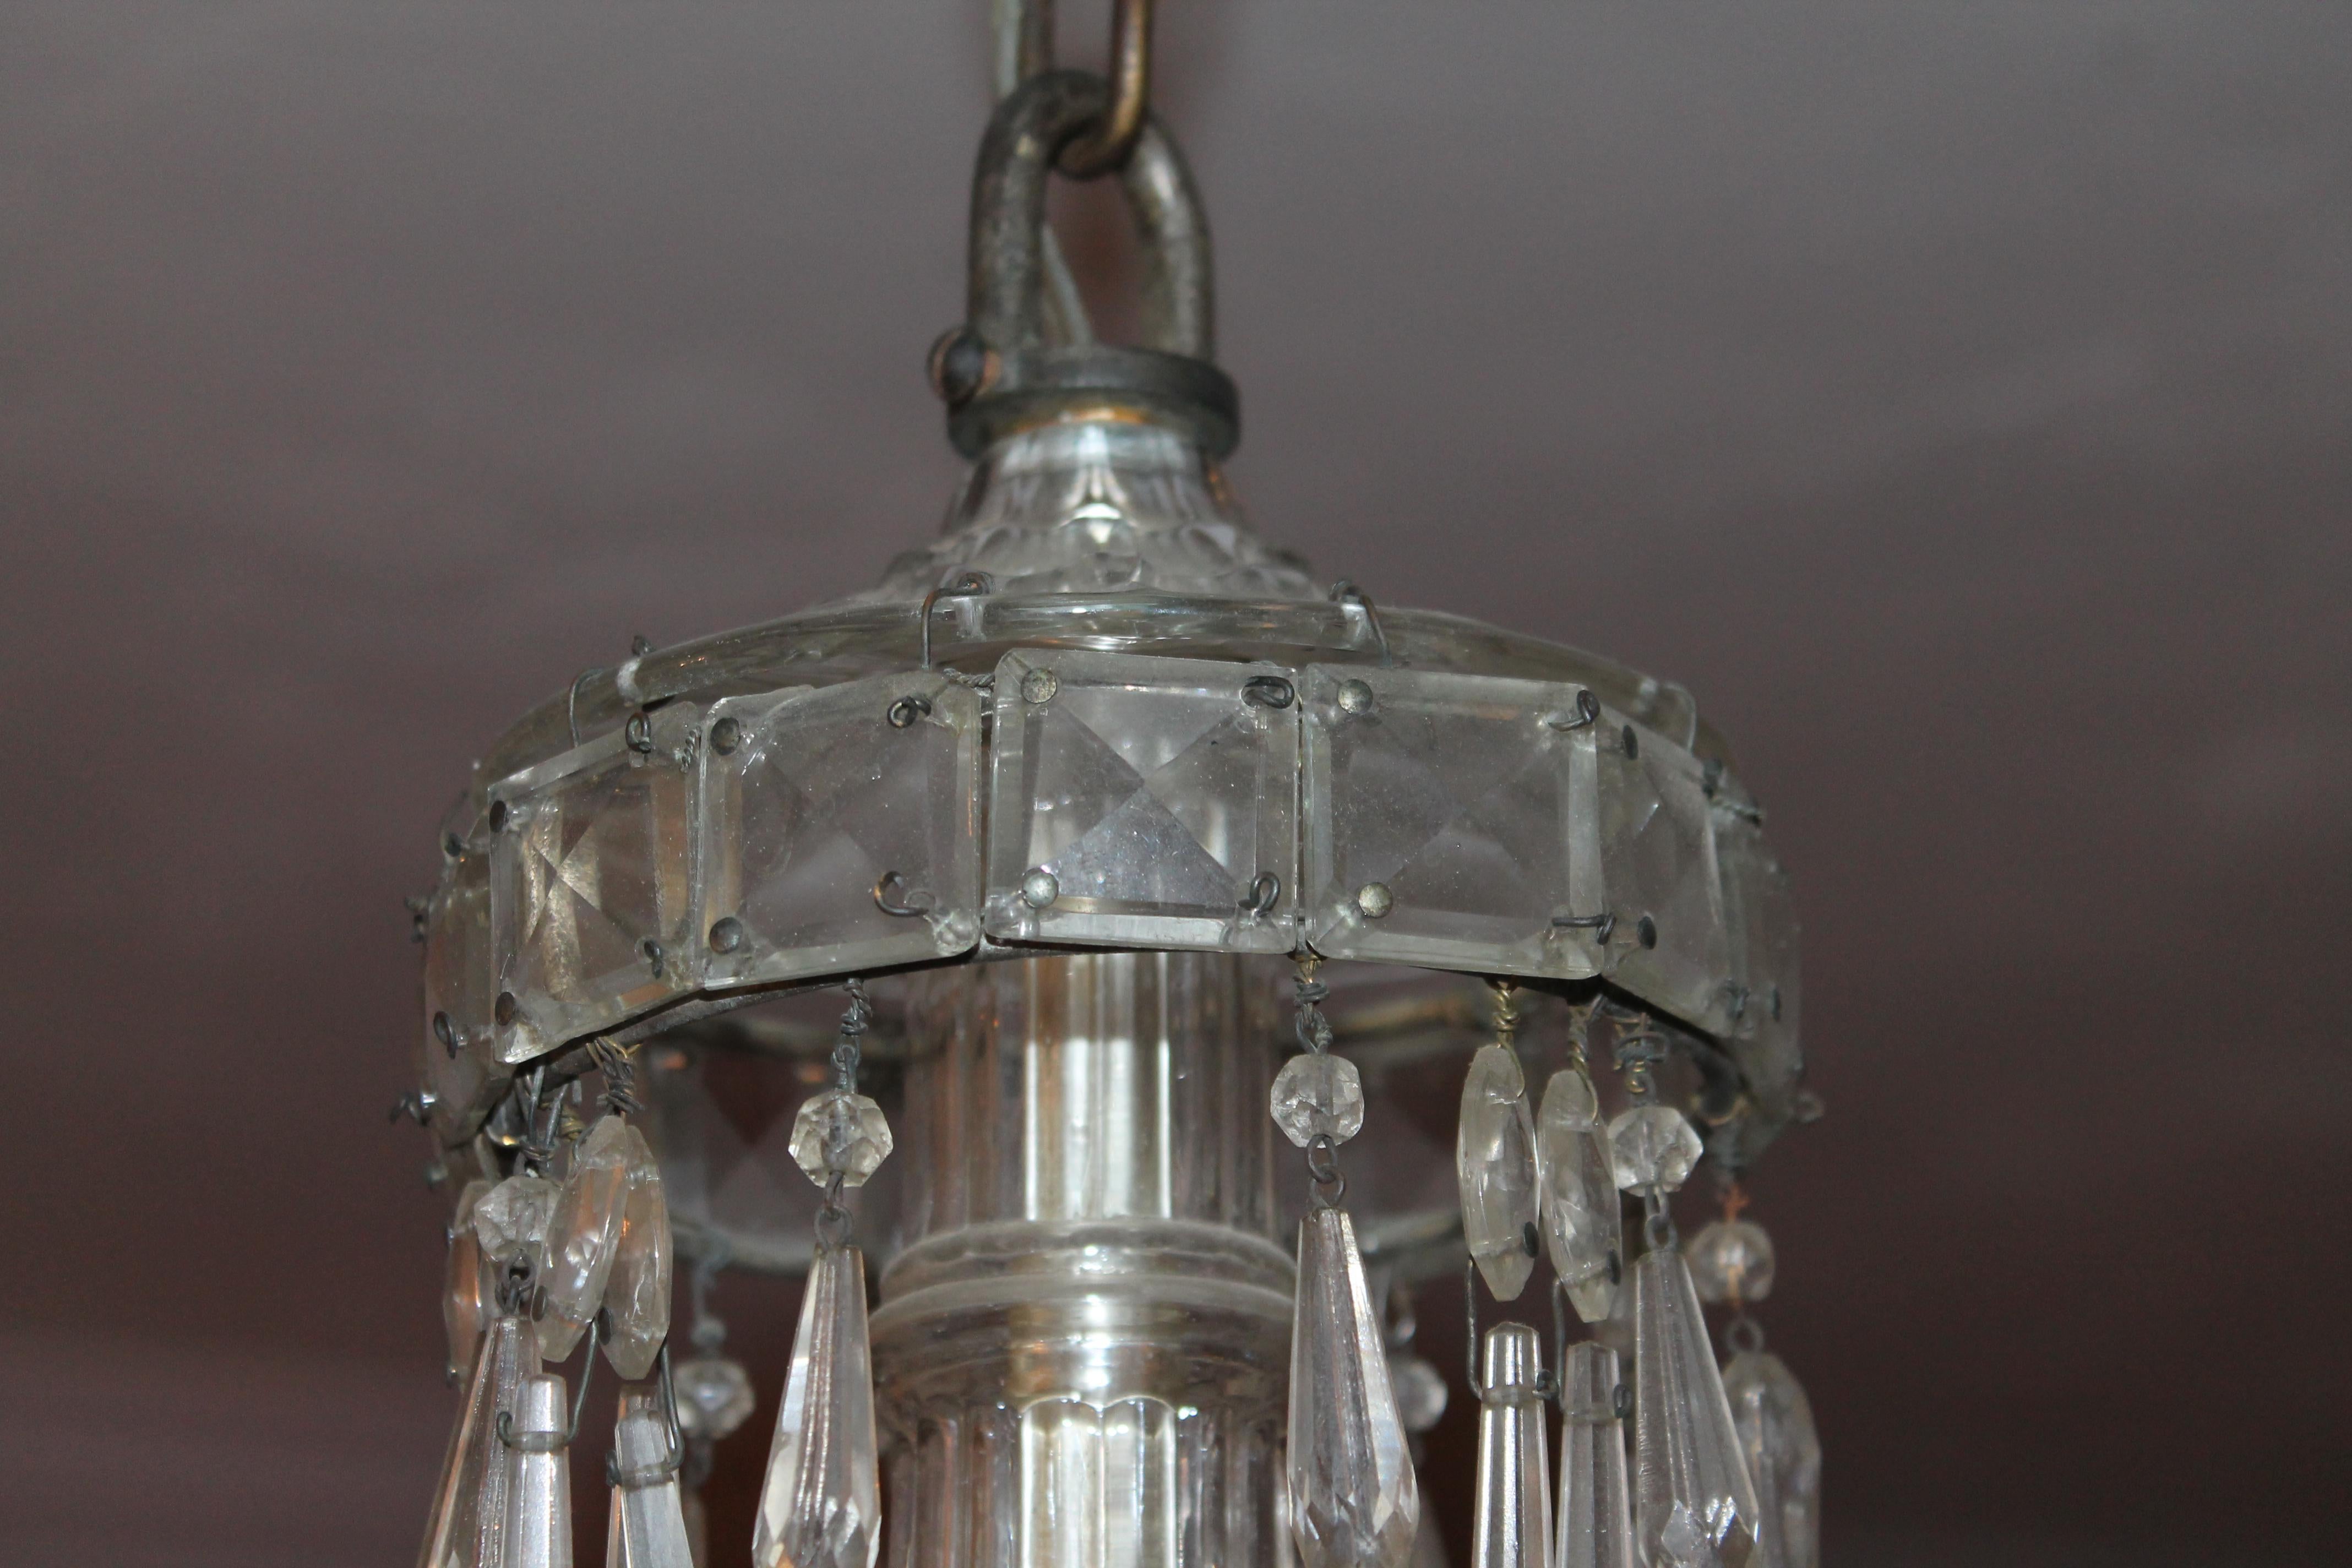 Beautiful c1910 French Neoclassic Cut Crystal Chandelier Signed by Maison Bagues. Stunning Steel Hexagon Frame. Highly detailed and reminiscent of a Russian Chandelier.